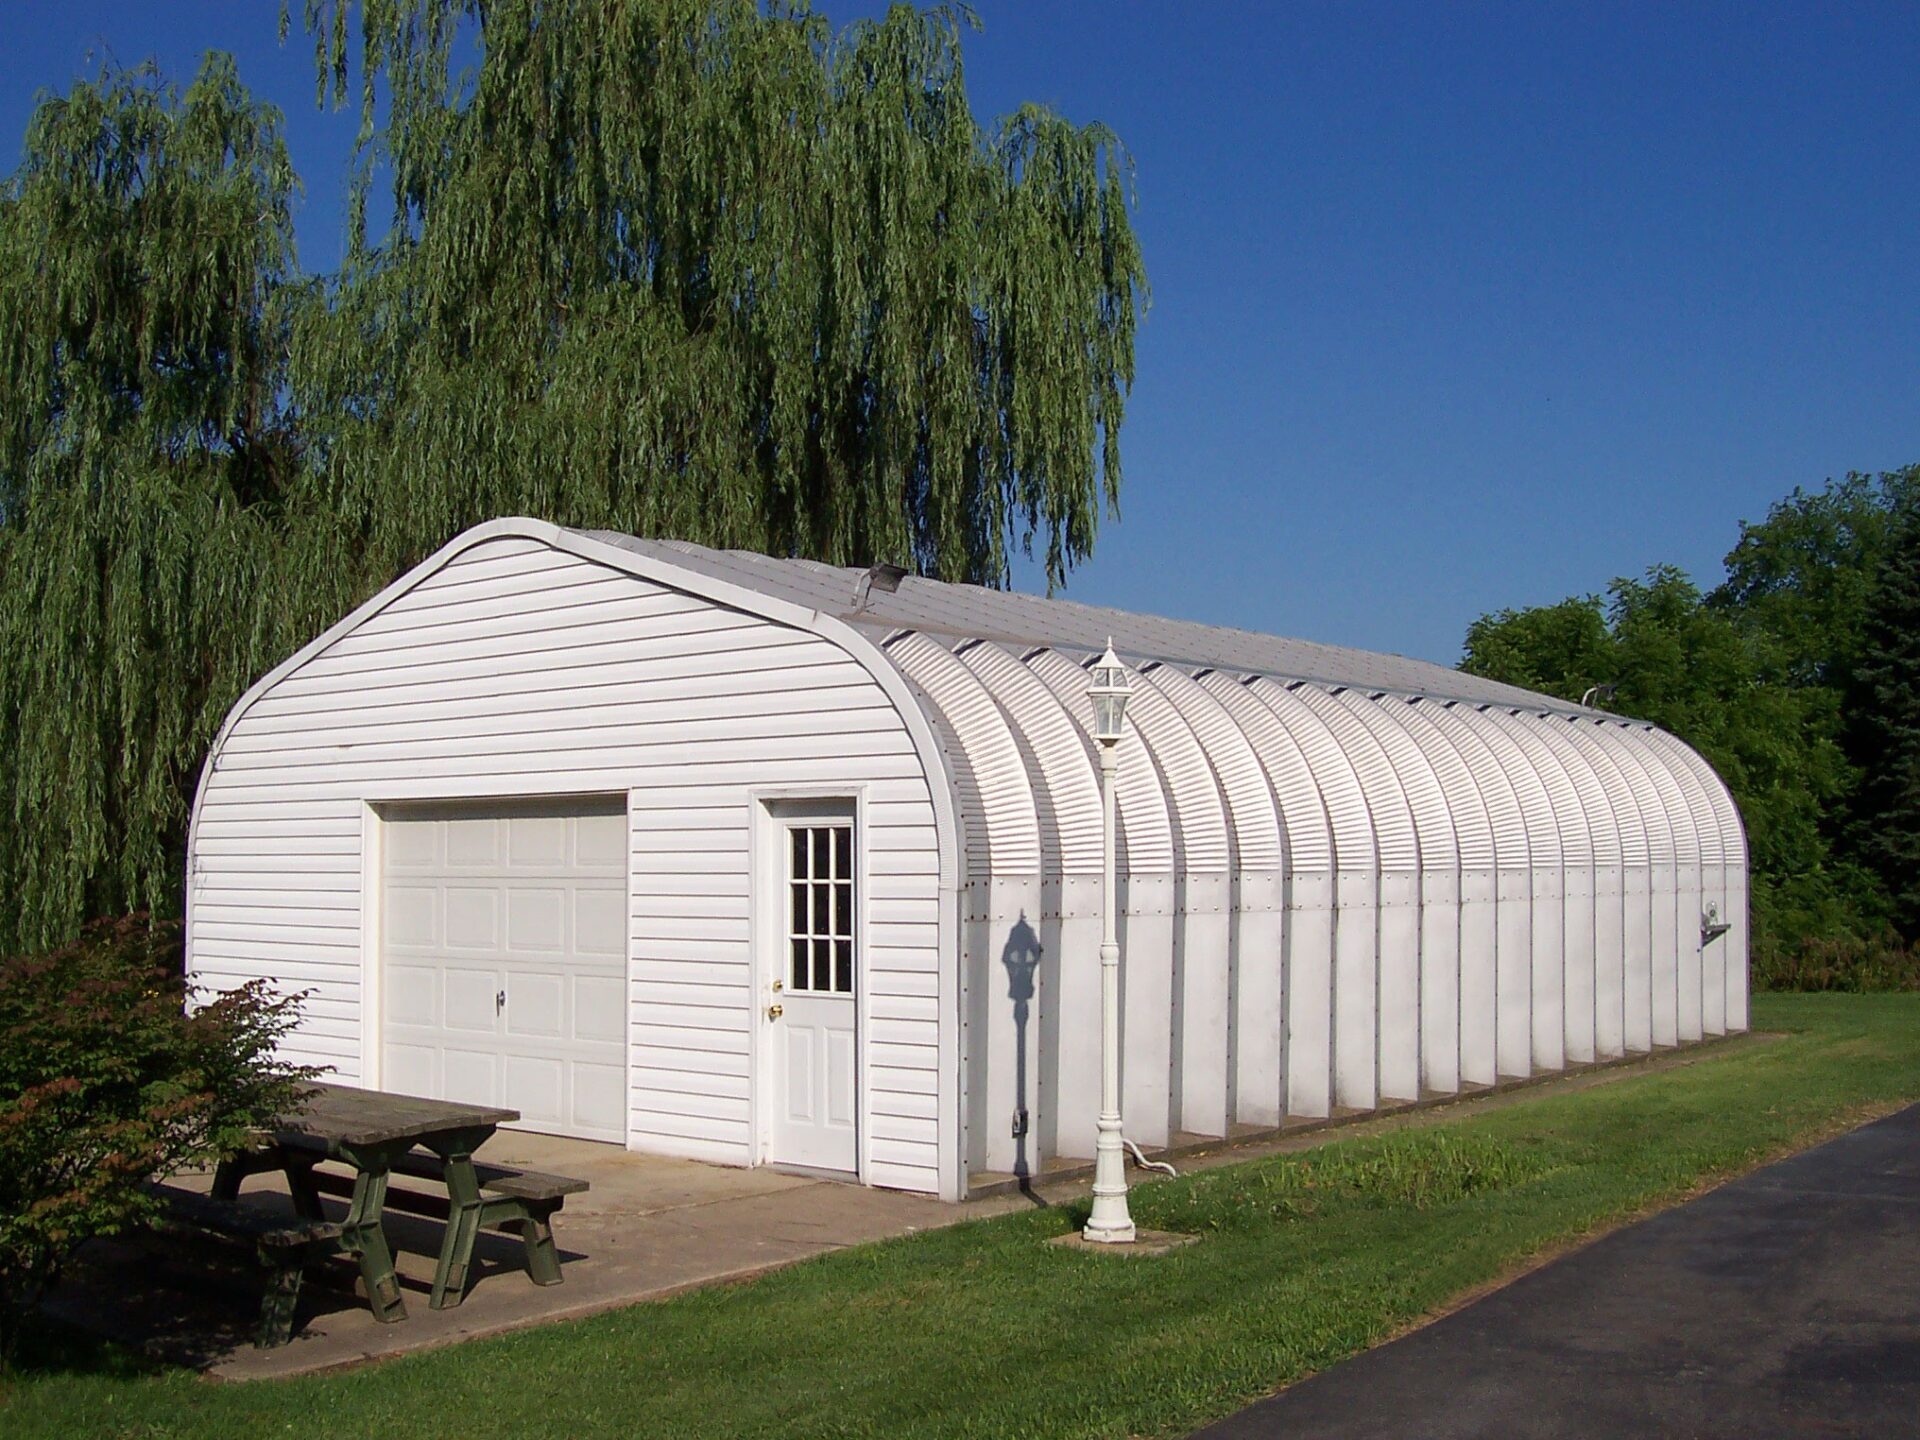 A-Model Quonset hut with white end wall, white garage door, and white lamp pole with a brown bench outside of the Quonset hut.